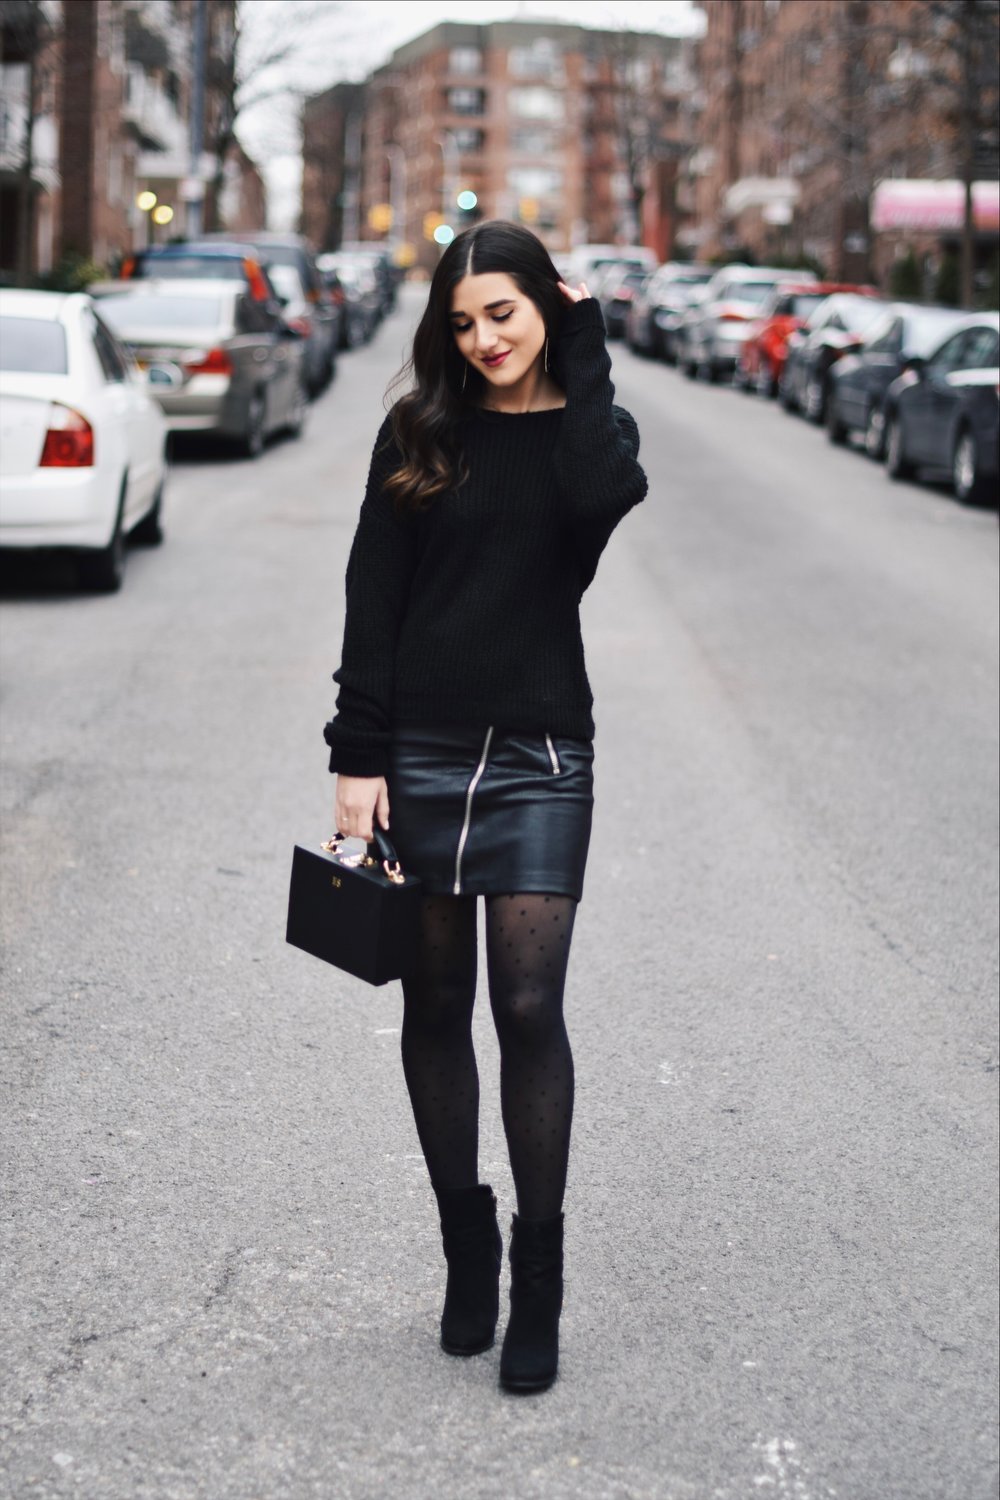 All Black Look // 5 Ways To Keep Your New Year's Resolution Going Strong